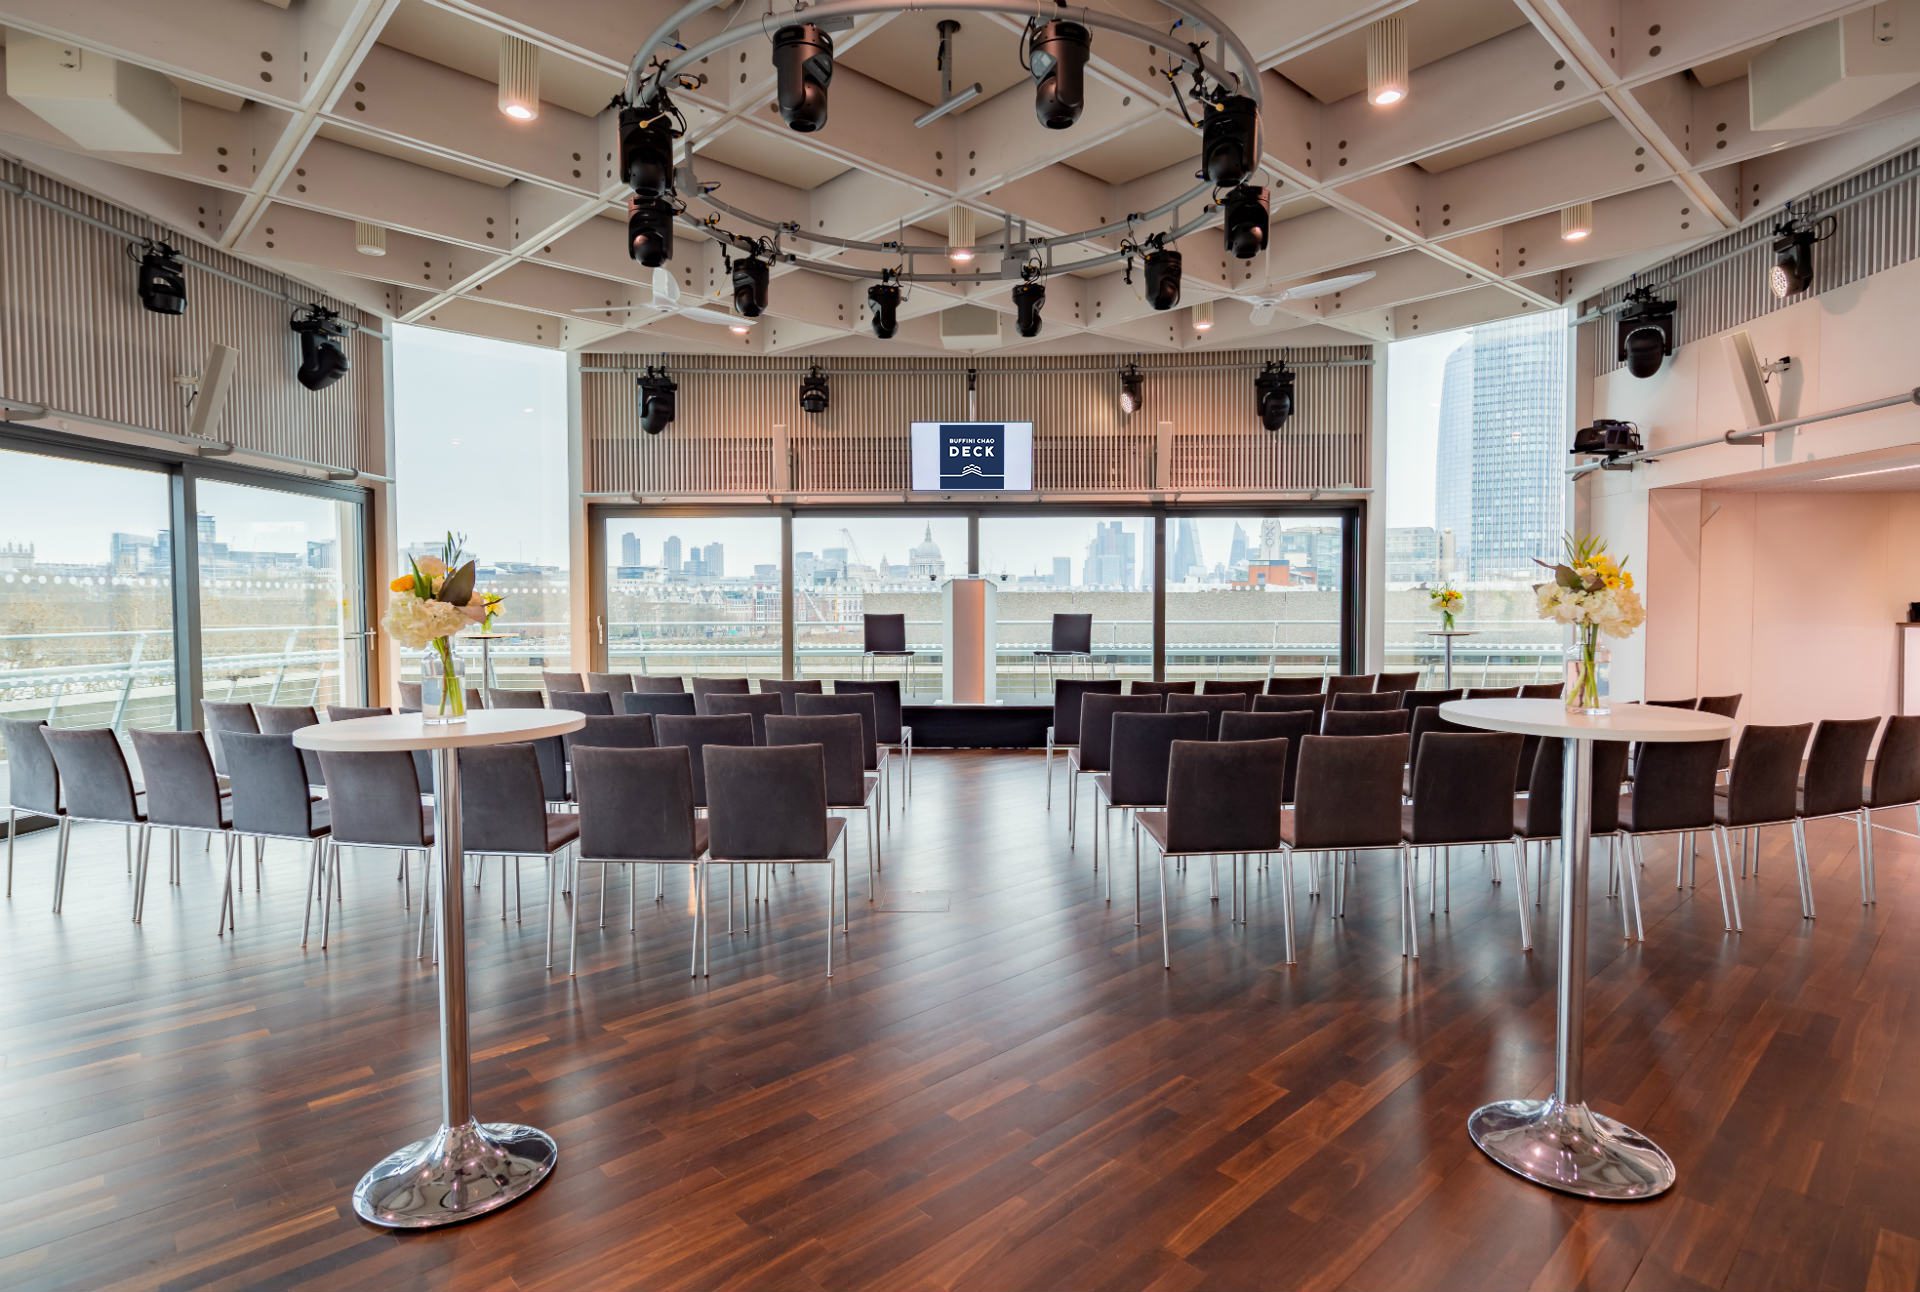 A conference setup in the Buffini Chao Deck